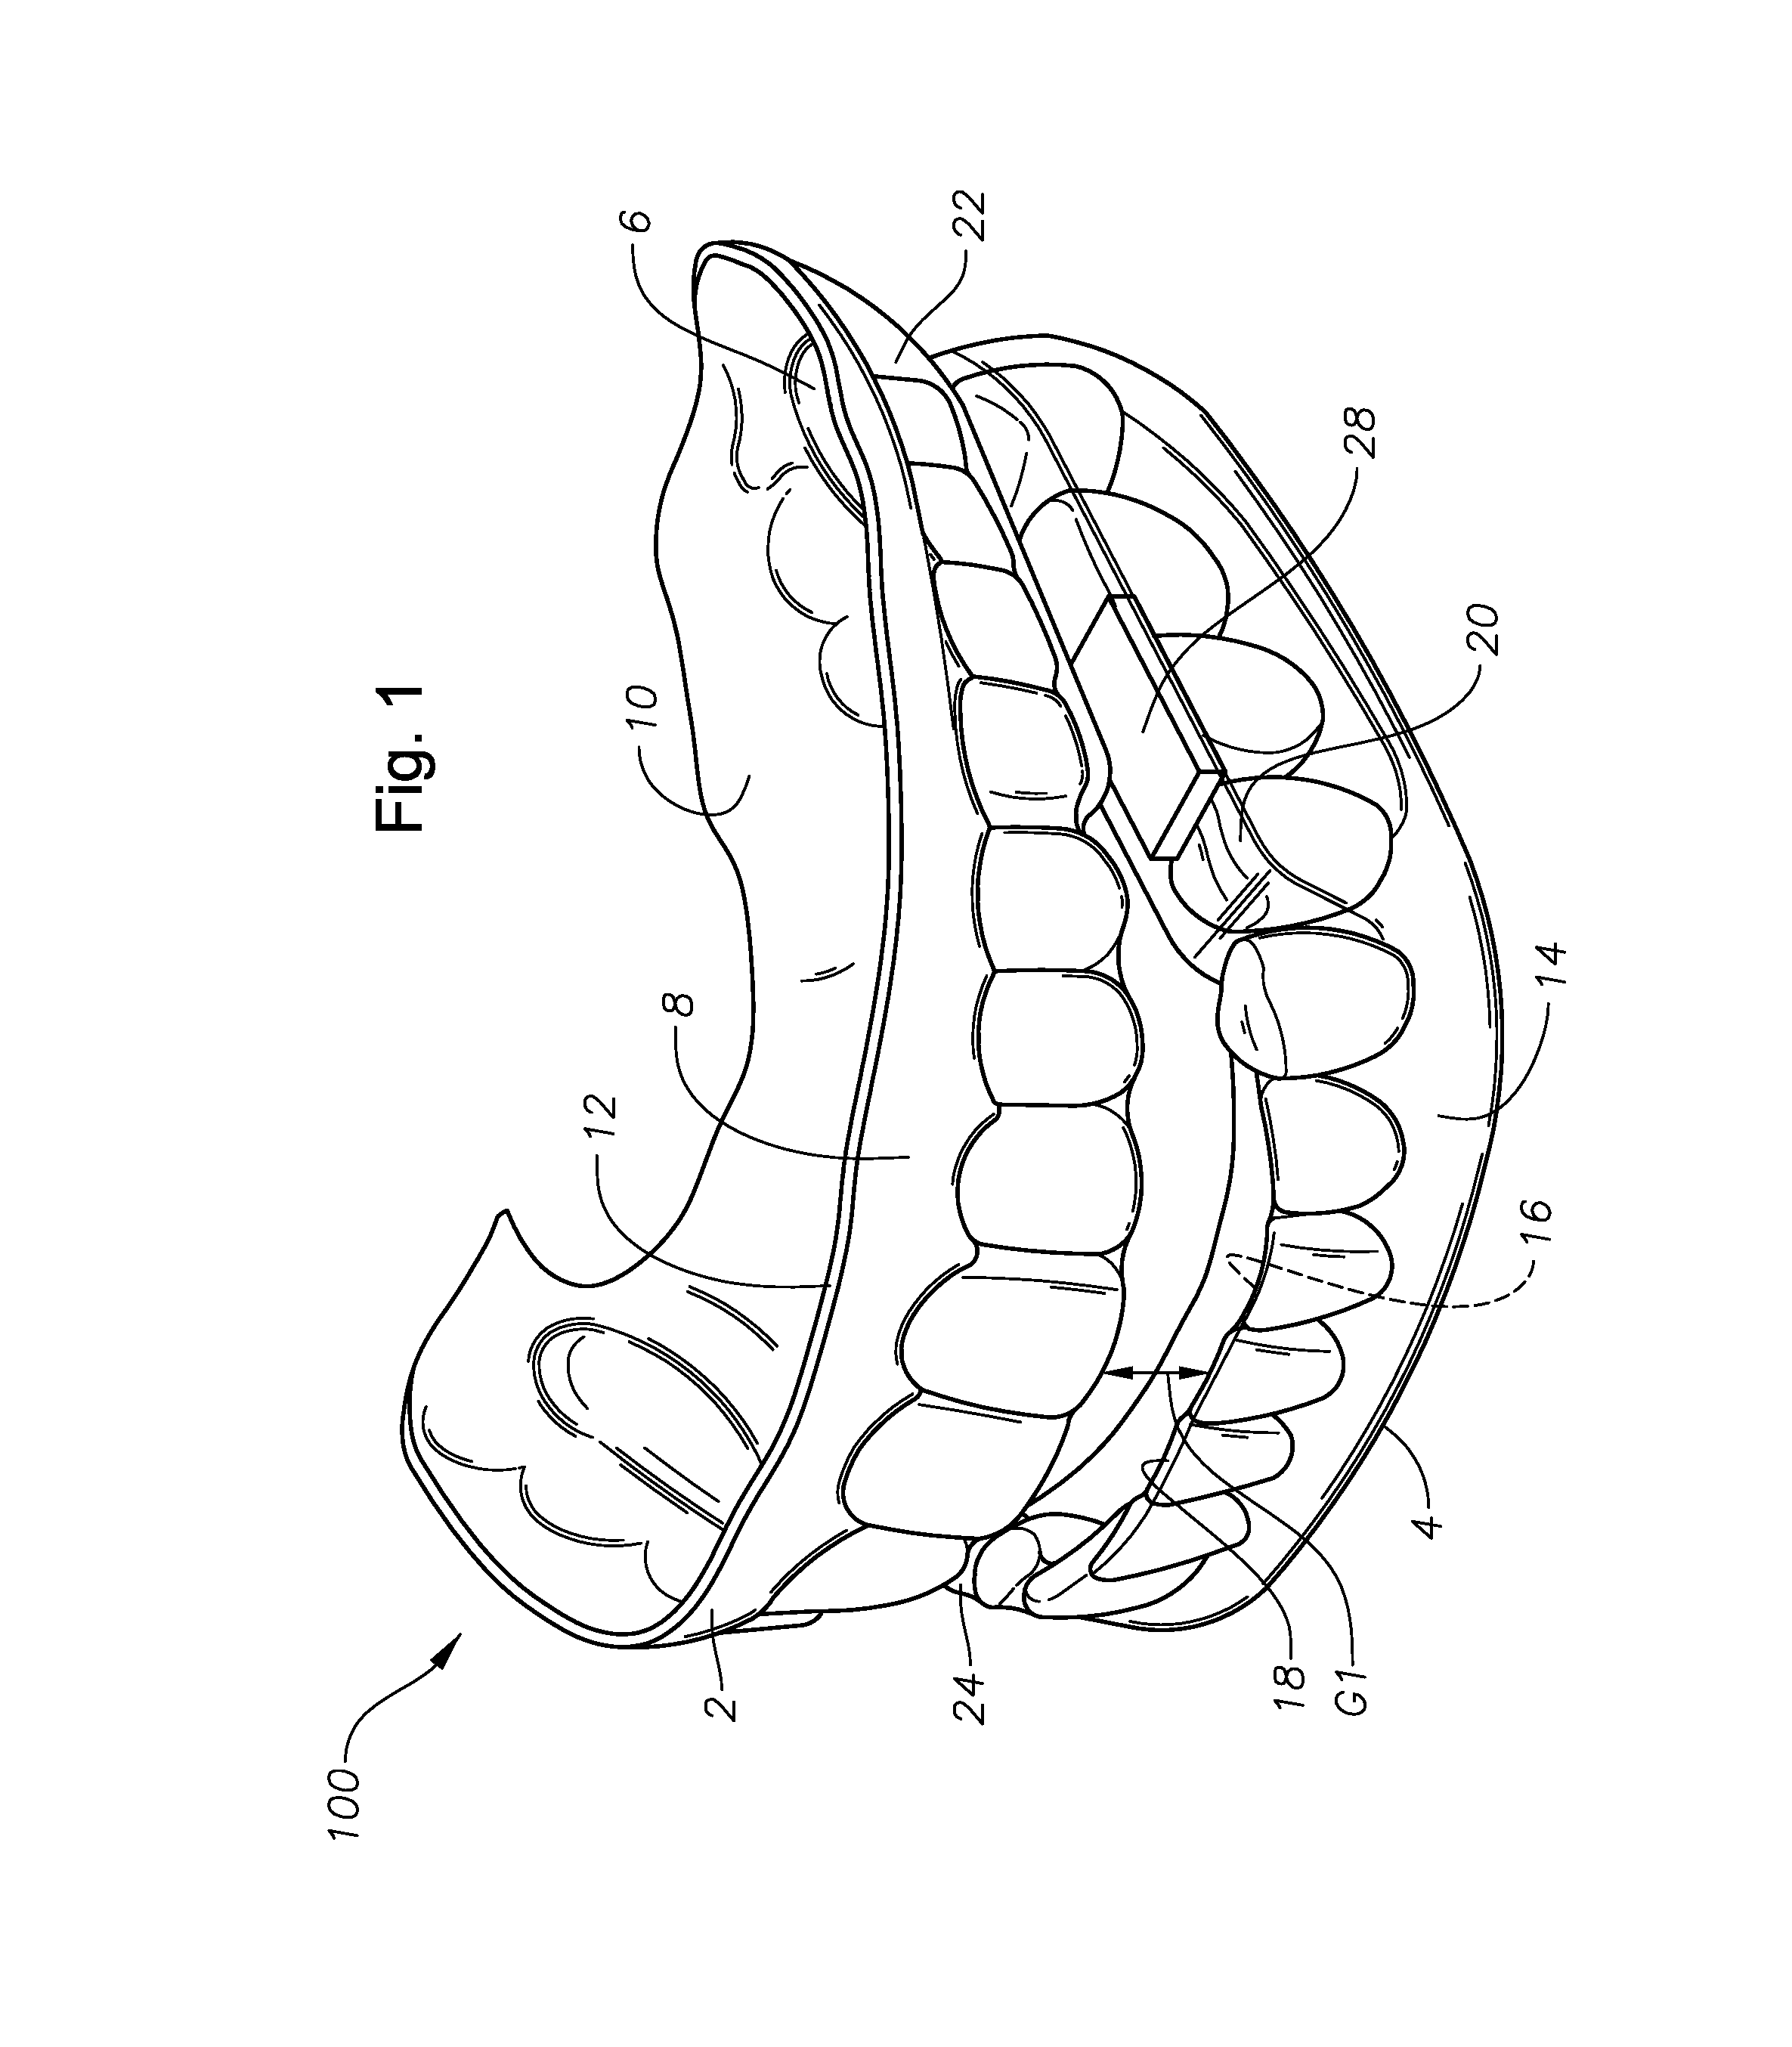 Oral devices, kits, and methods for reducing sleep apnea, snoring, and/or nasal drainage